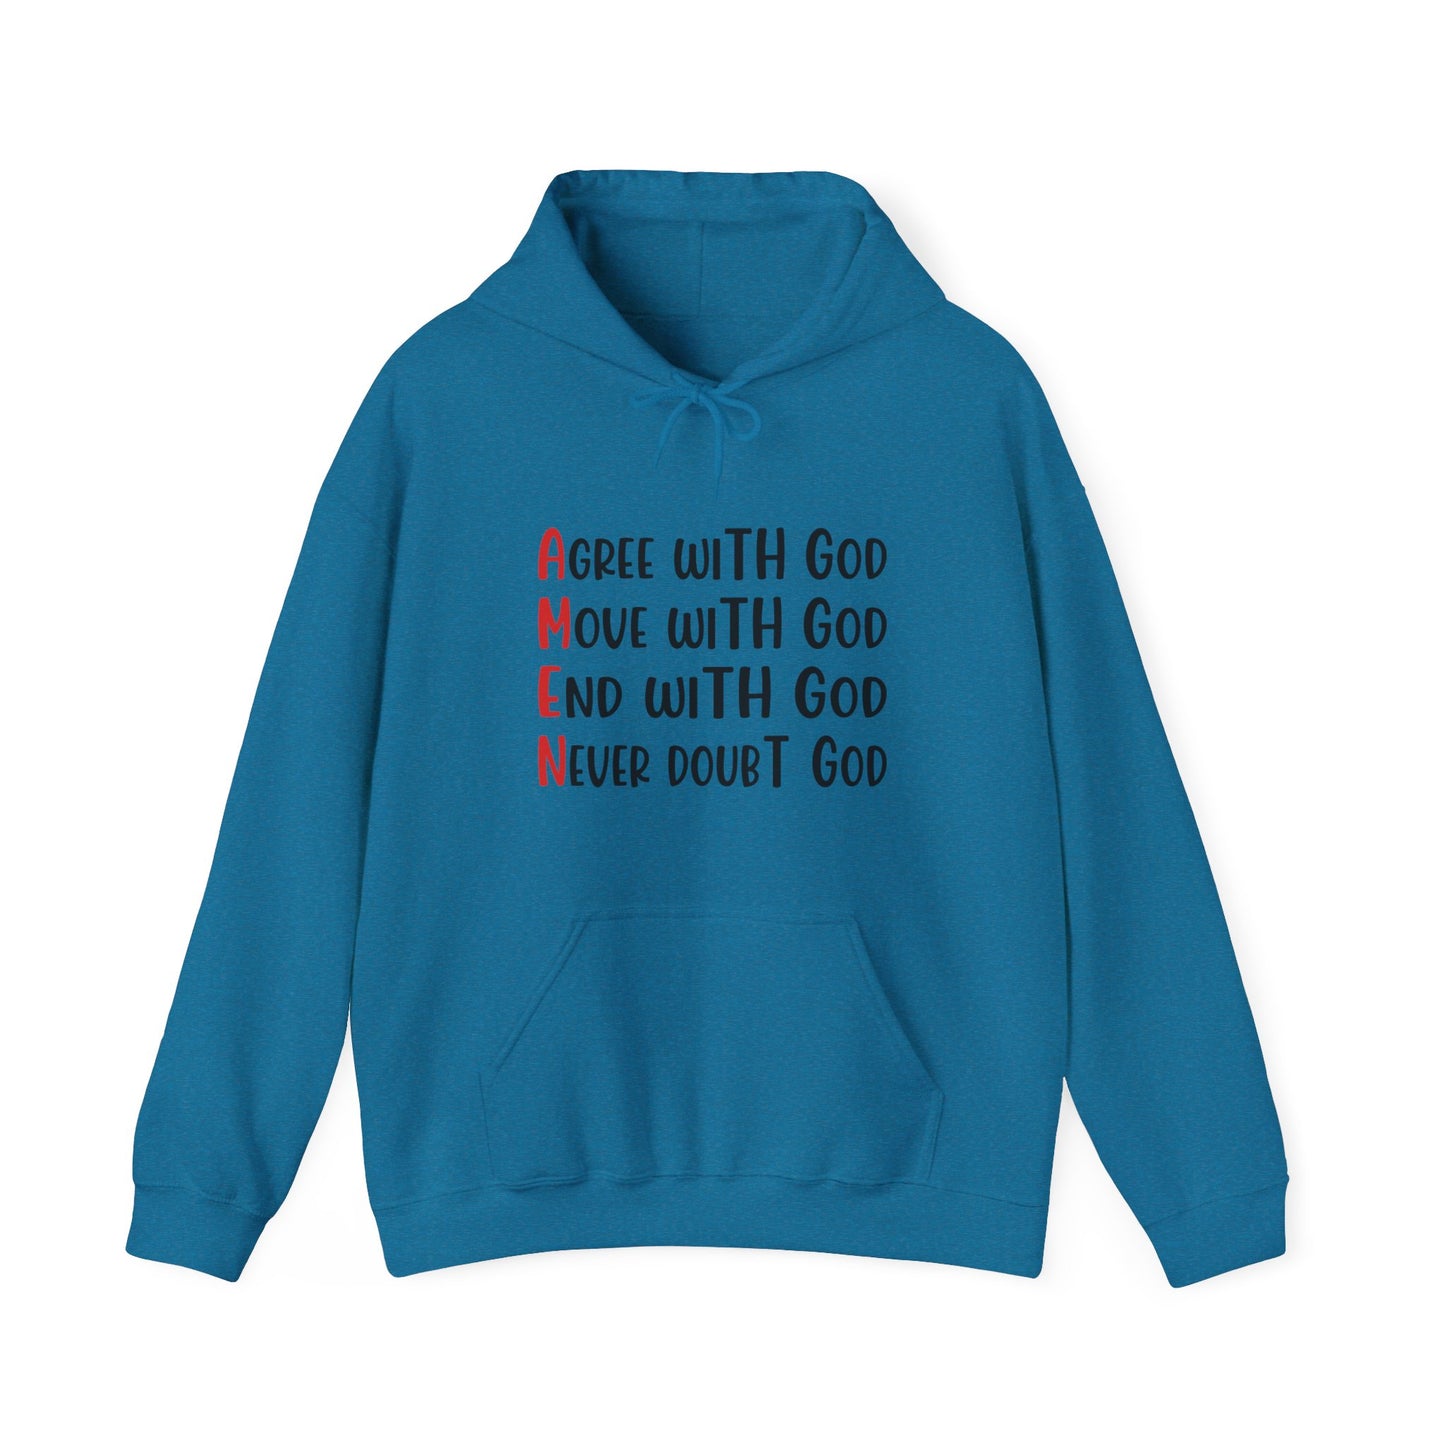 AMEN Agree, Move, End With God Never Doubt God Unisex Christian Hooded Pullover Sweatshirt